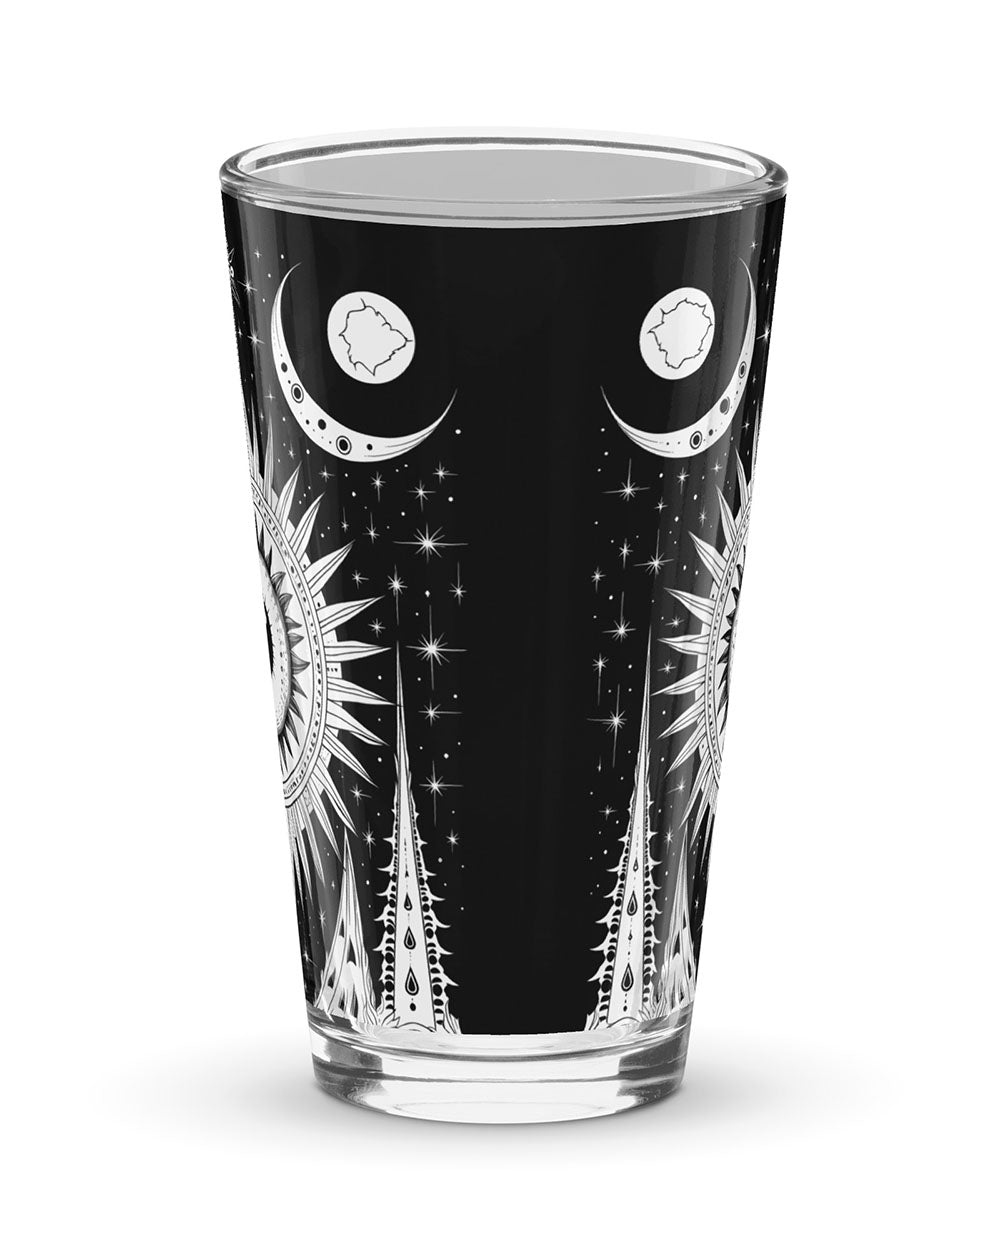 The Cosmos Awakens Pint Glass - Witchy Alt Style Goth Drinkware Gothic Kitchen Decor Halloween Gift